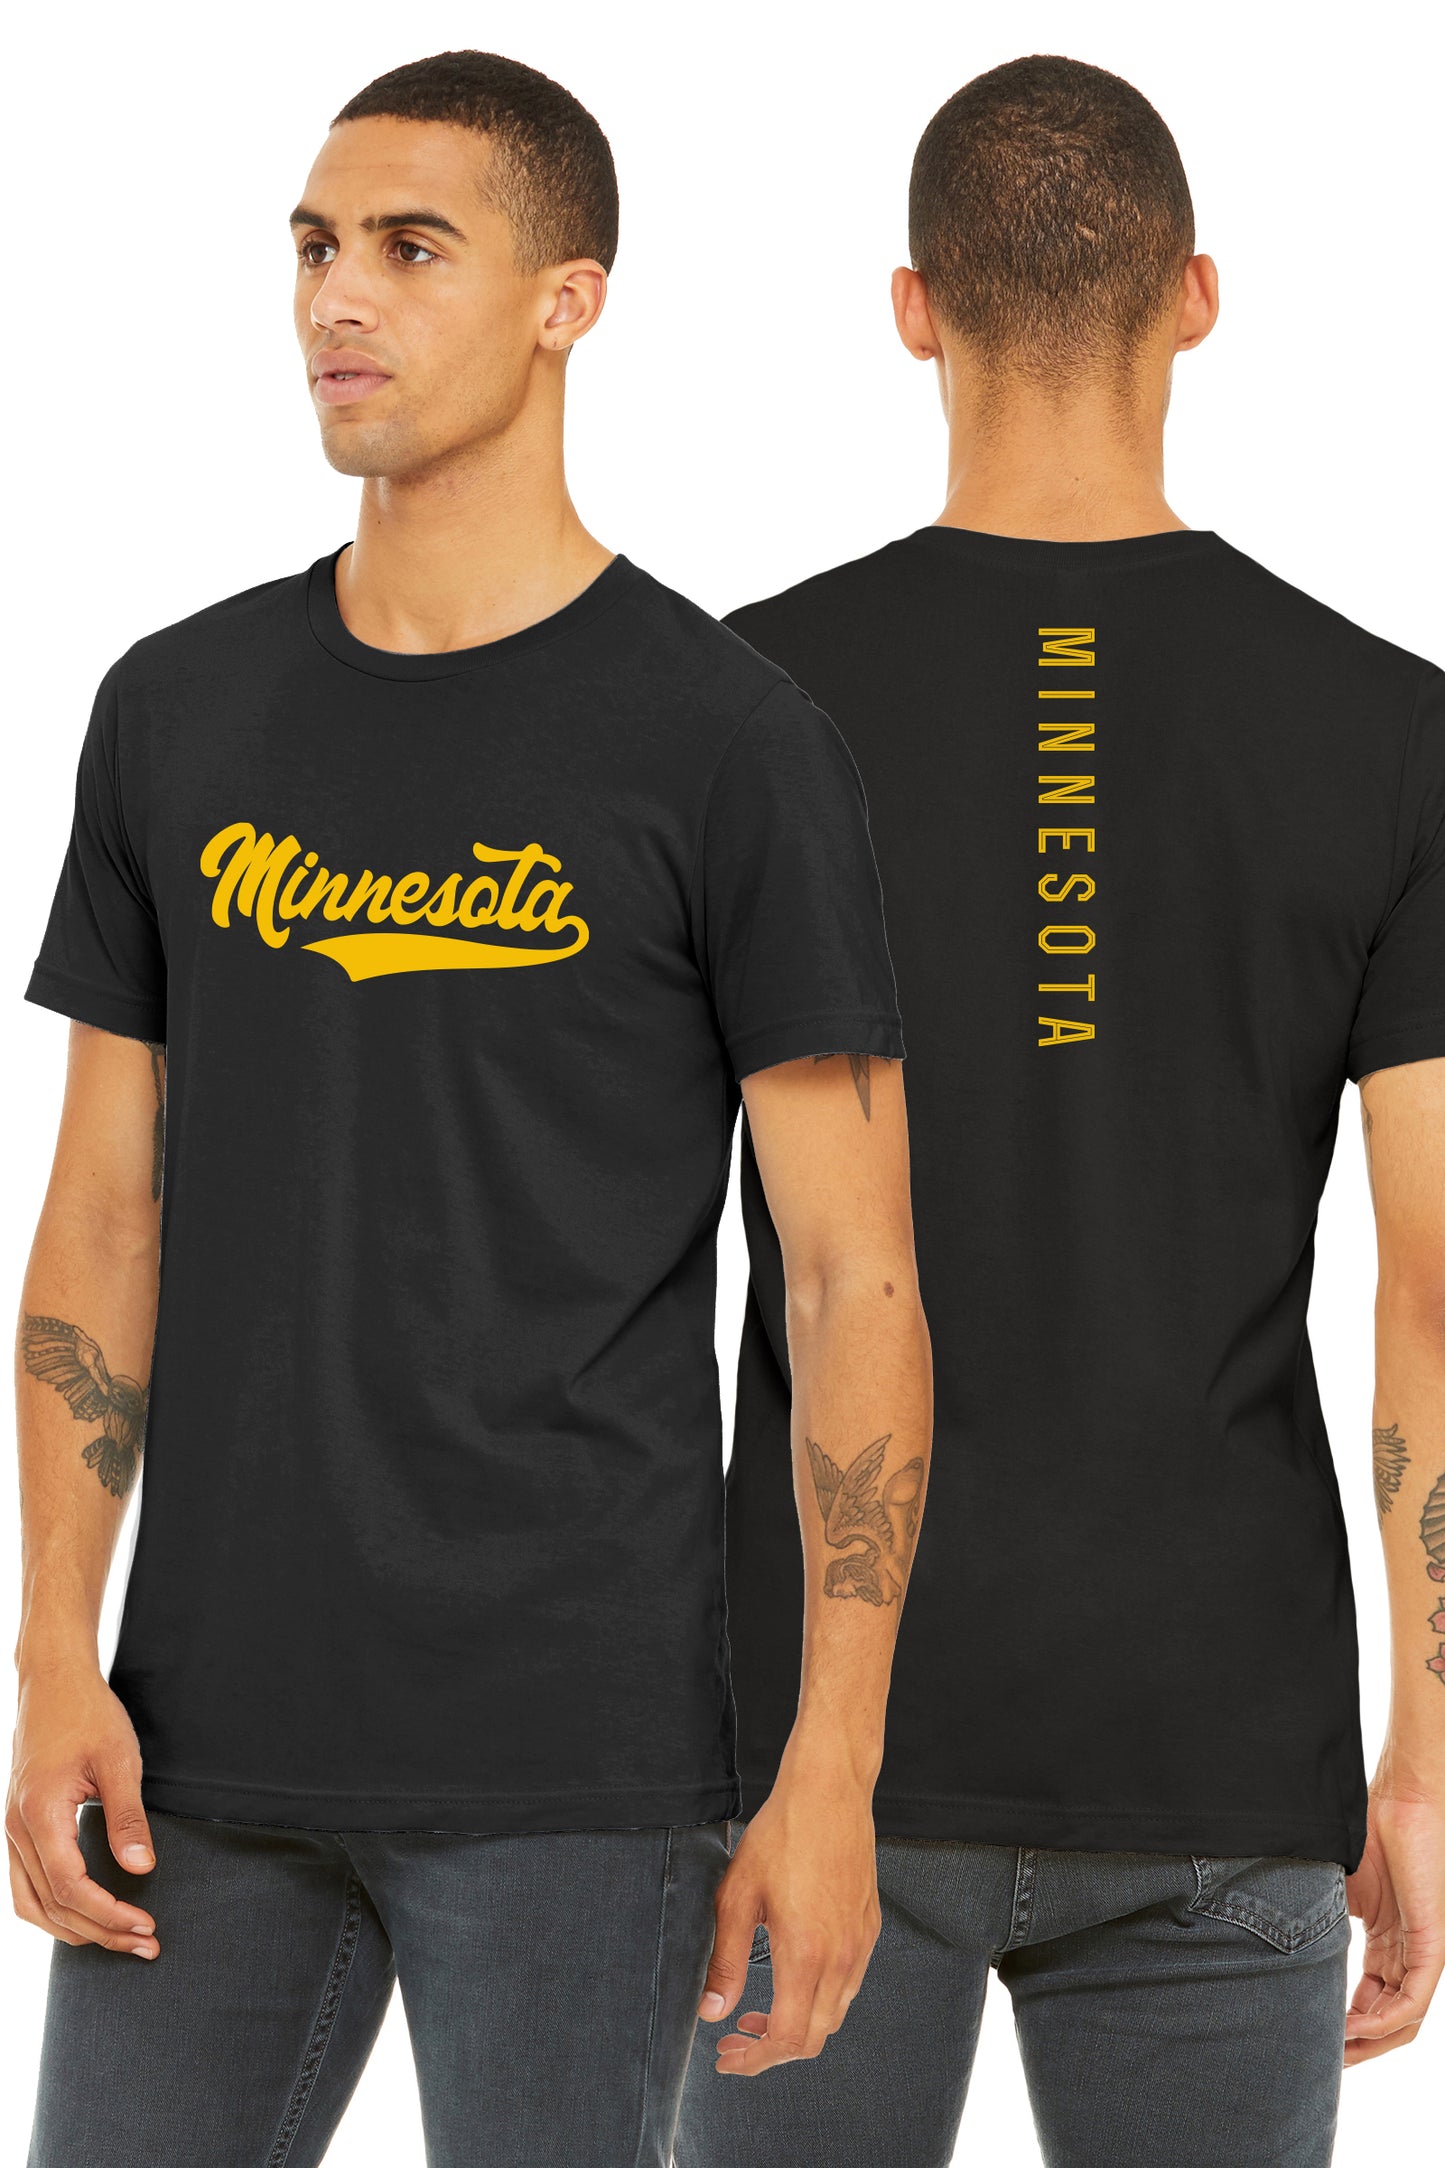 Daxton Adult Unisex Tshirt Minnesota Script with Vertical on the Back